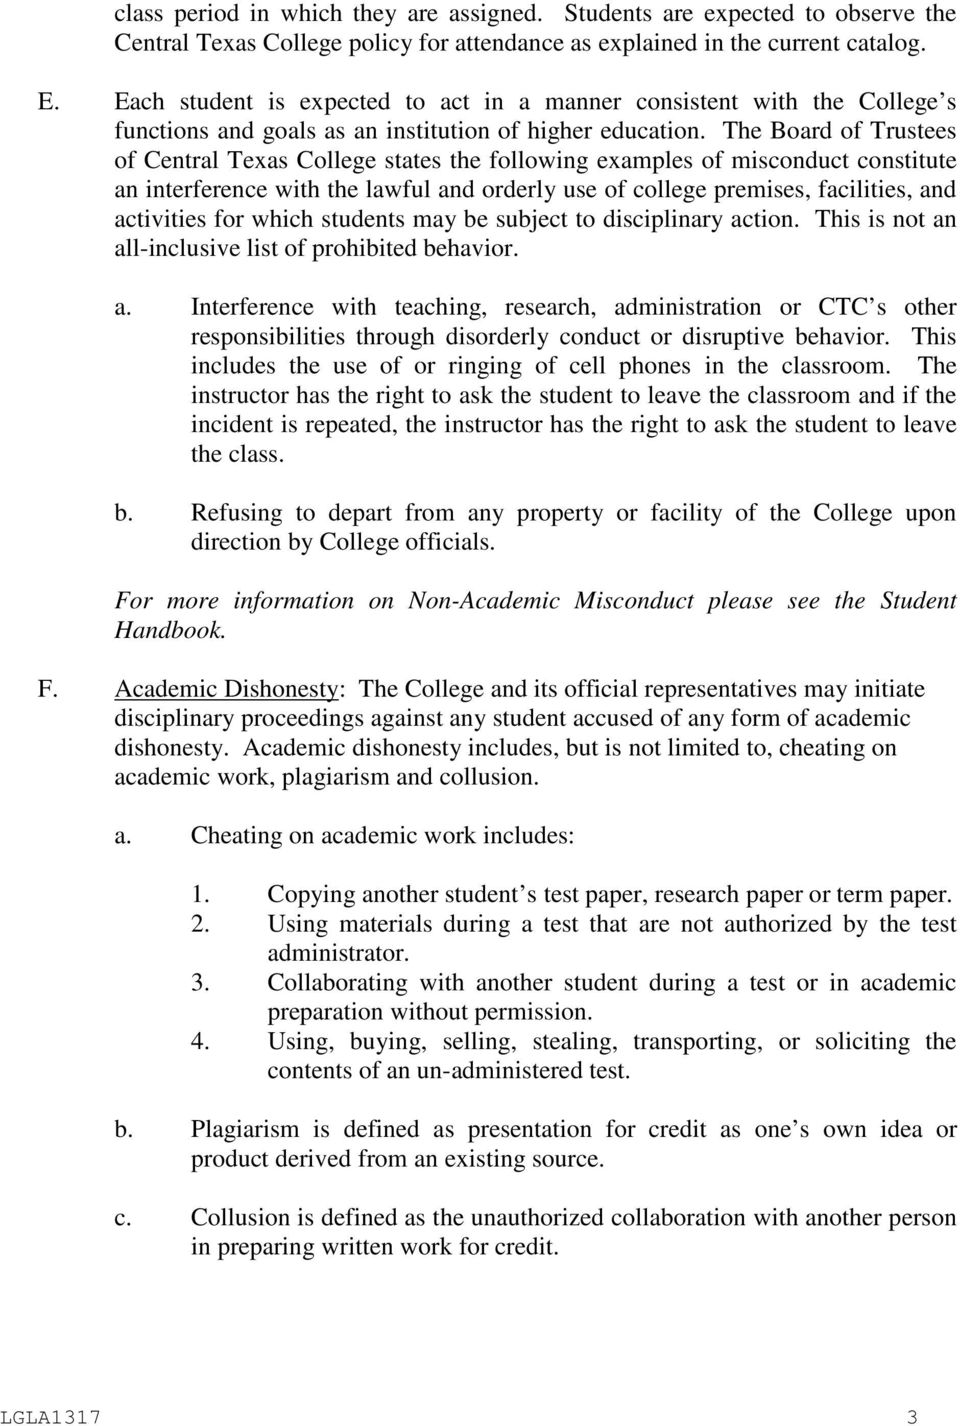 The Board of Trustees of Central Texas College states the following examples of misconduct constitute an interference with the lawful and orderly use of college premises, facilities, and activities